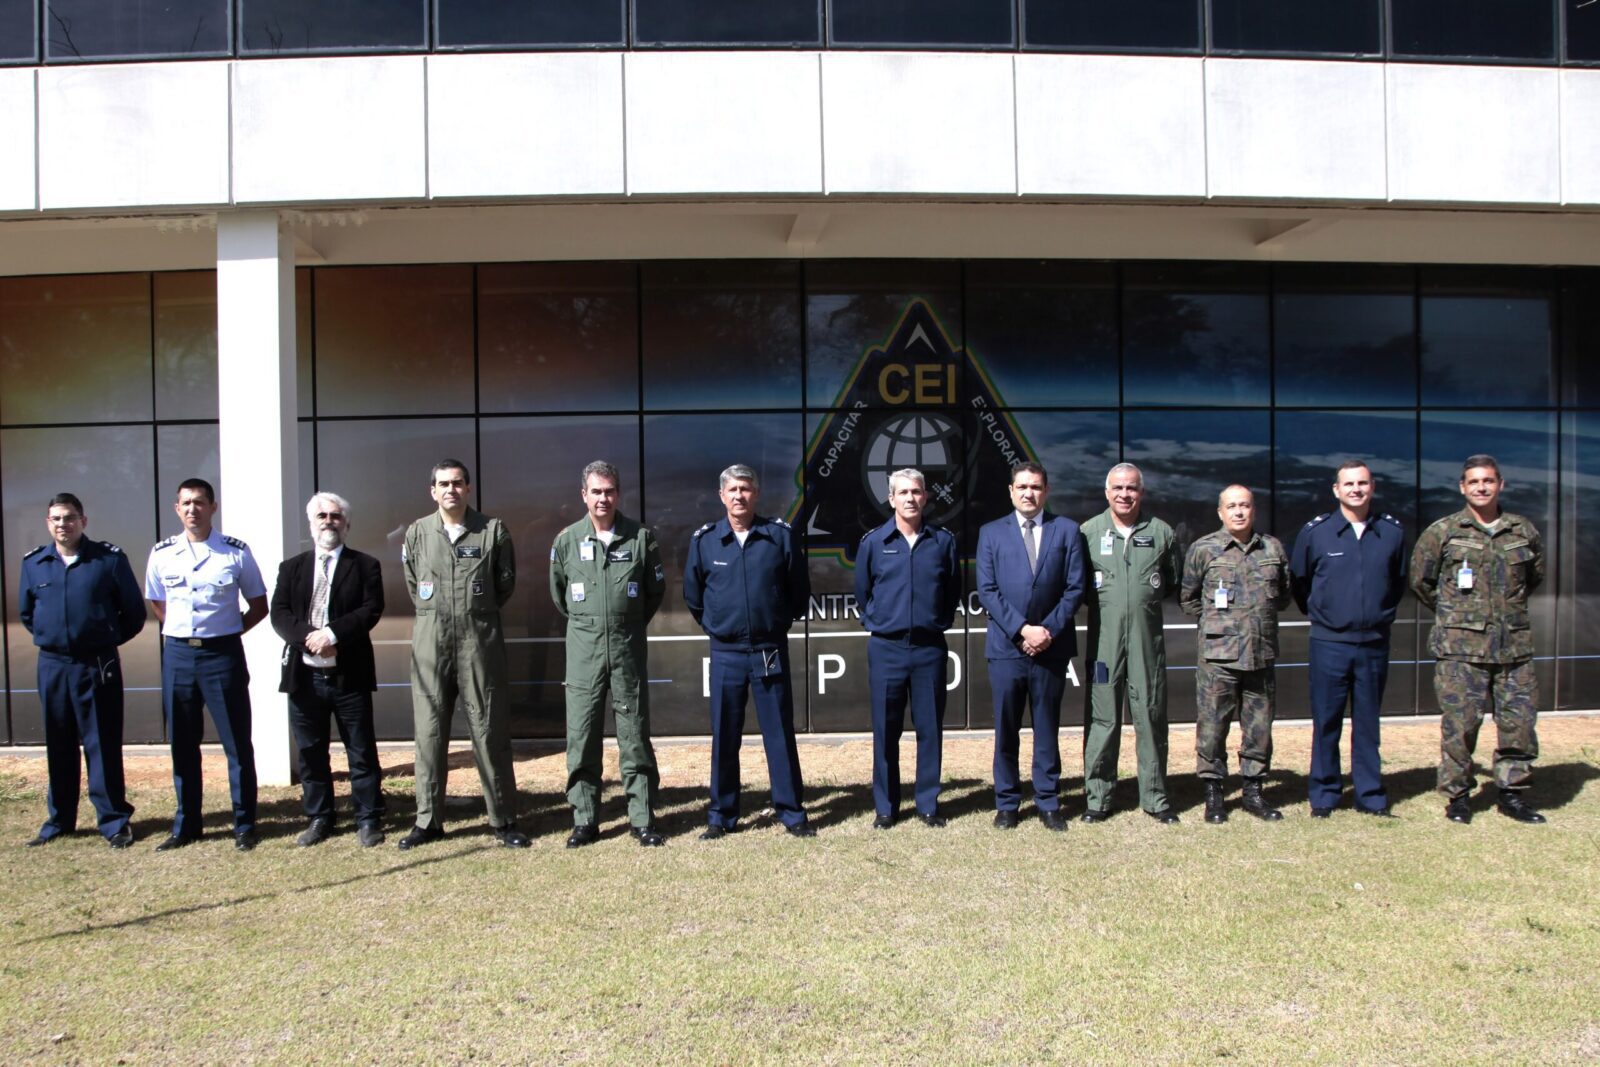 DCTA receives a visit from the Aerospace Operations Command